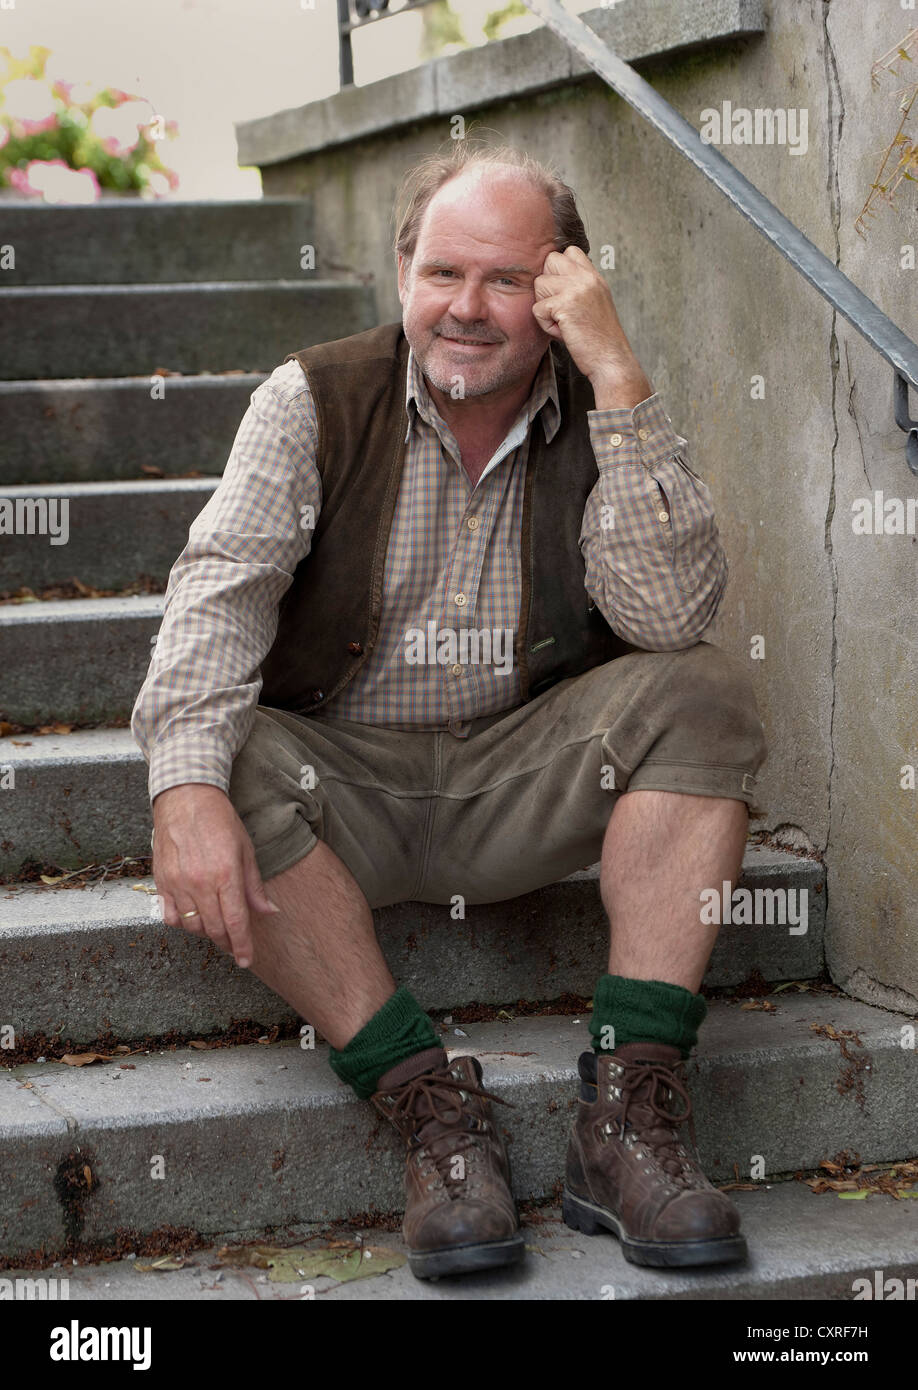 ActorAugust Schmoelzer at a photo call, filming the TV movie 'Die Landaerztin' or The Country Doctor in , Upper Austria, Austria Stock Photo